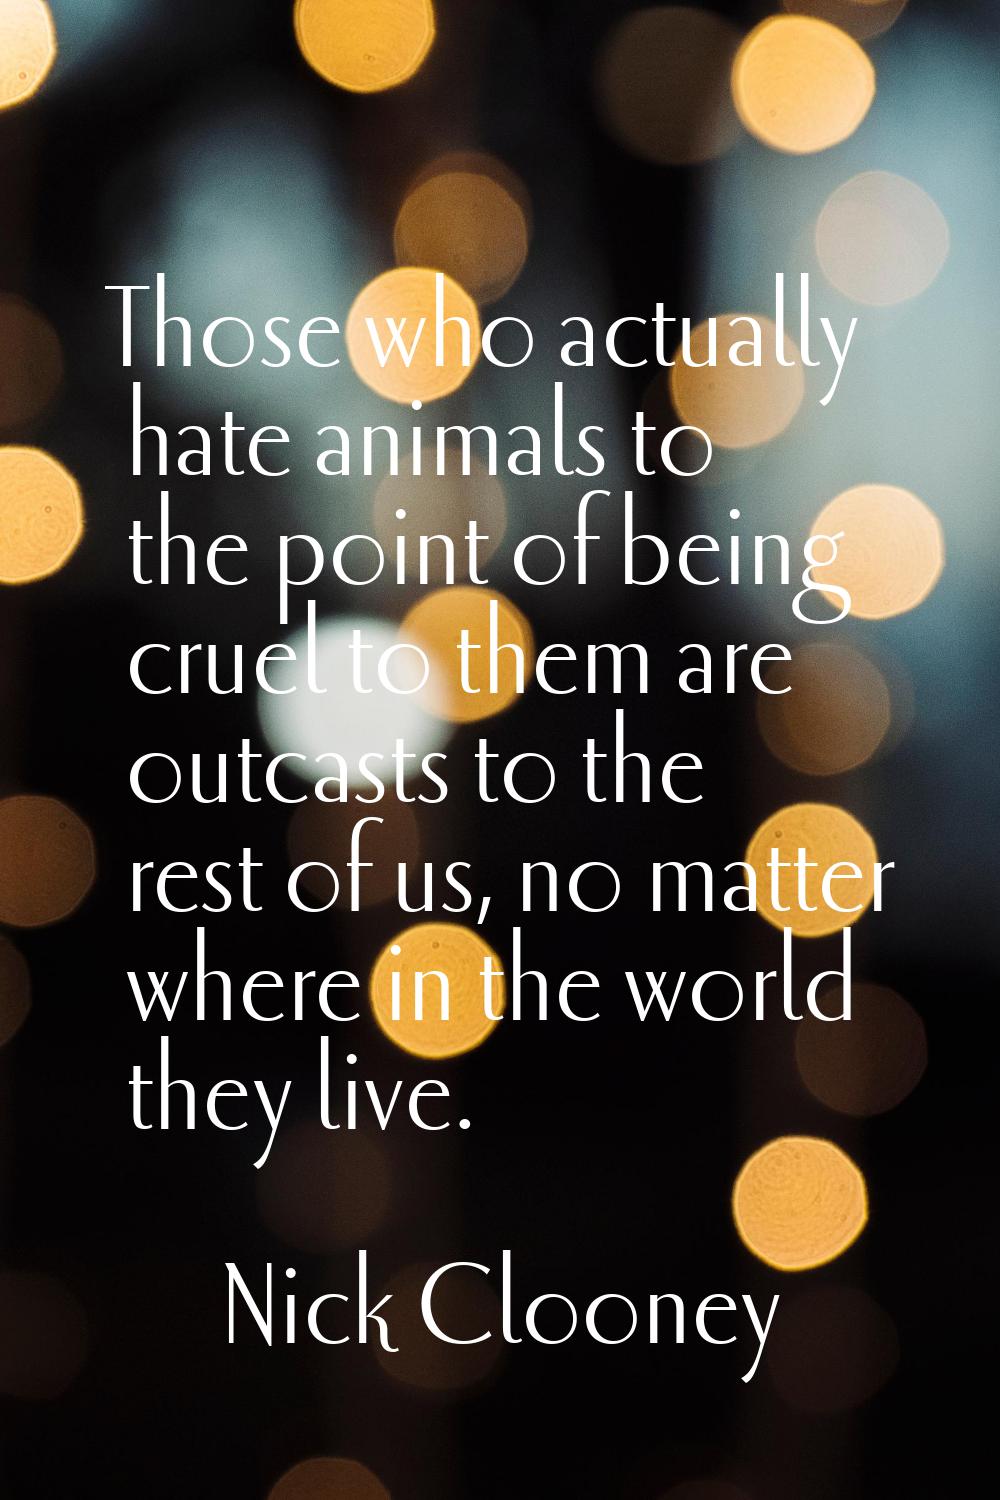 Those who actually hate animals to the point of being cruel to them are outcasts to the rest of us,